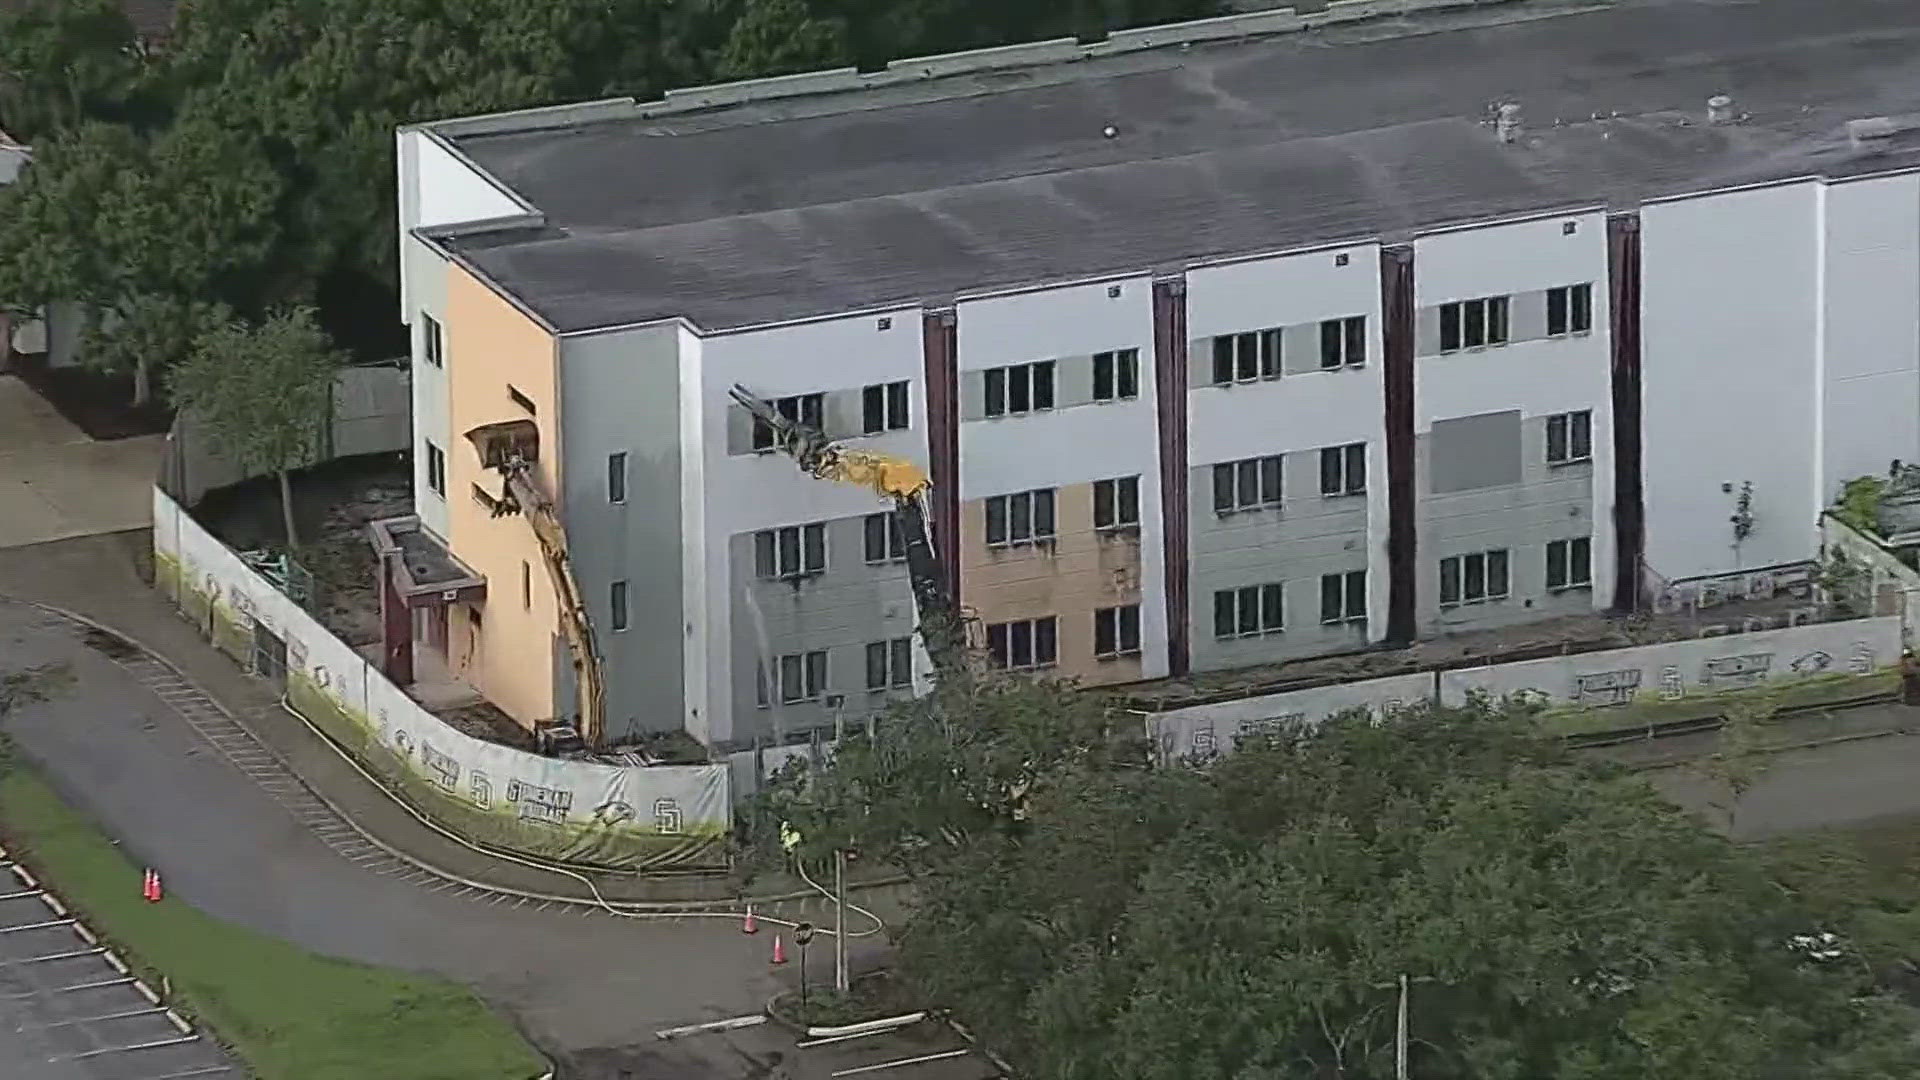 The three-story building in Florida where 17 people died in the 2018 mass shooting at Parkland’s Marjory Stoneman Douglas High School loomed over the campus.